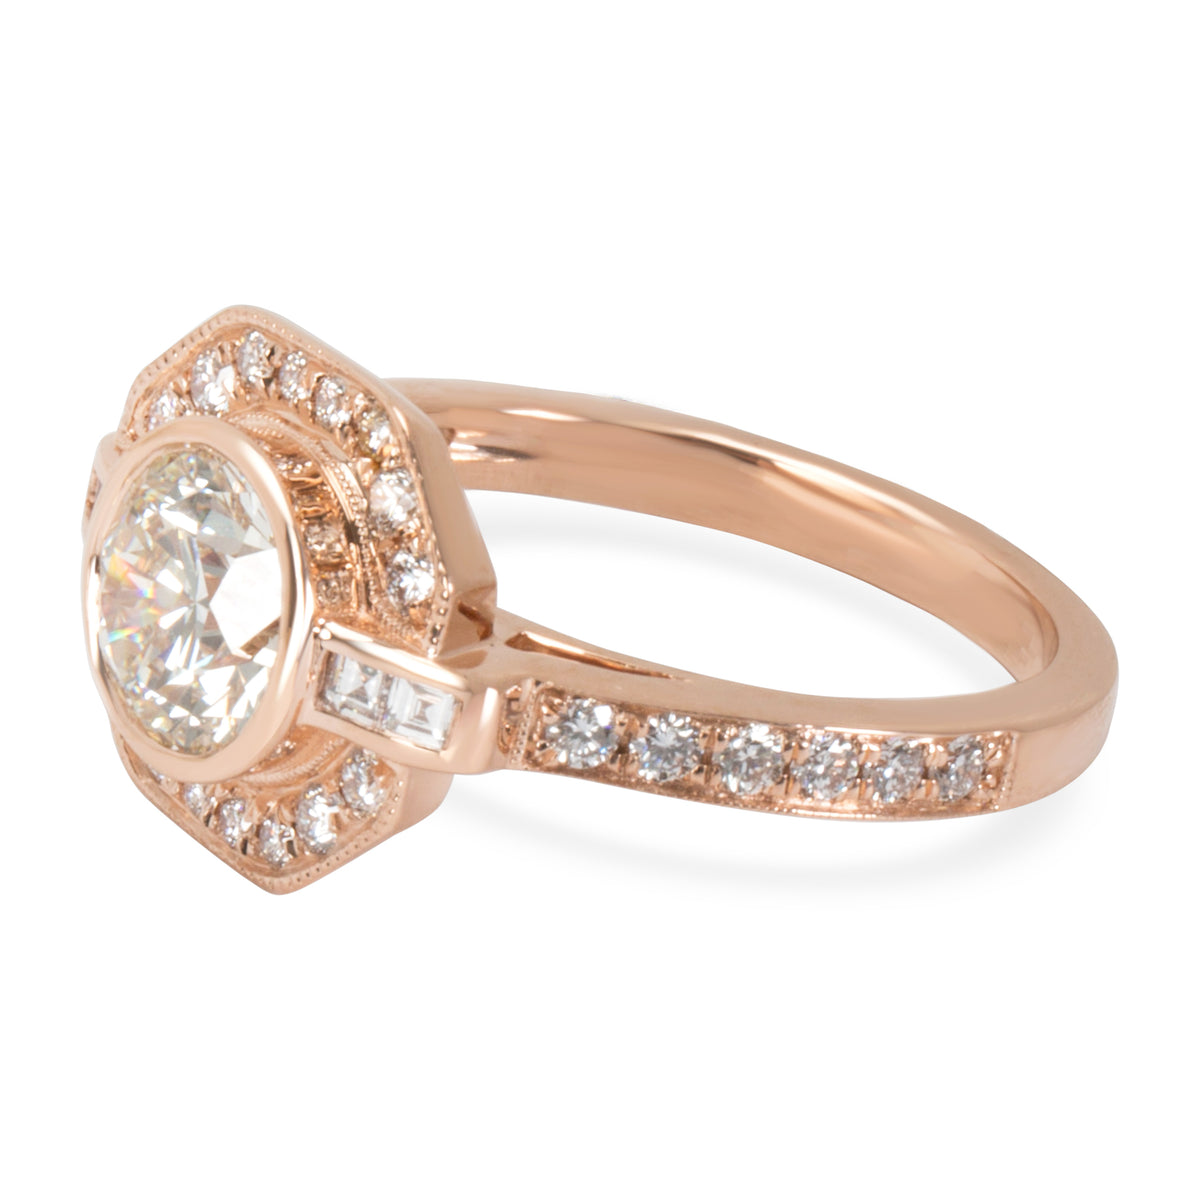 AGS Certified James Allen Diamond Engagement Ring in 14K Rose Gold